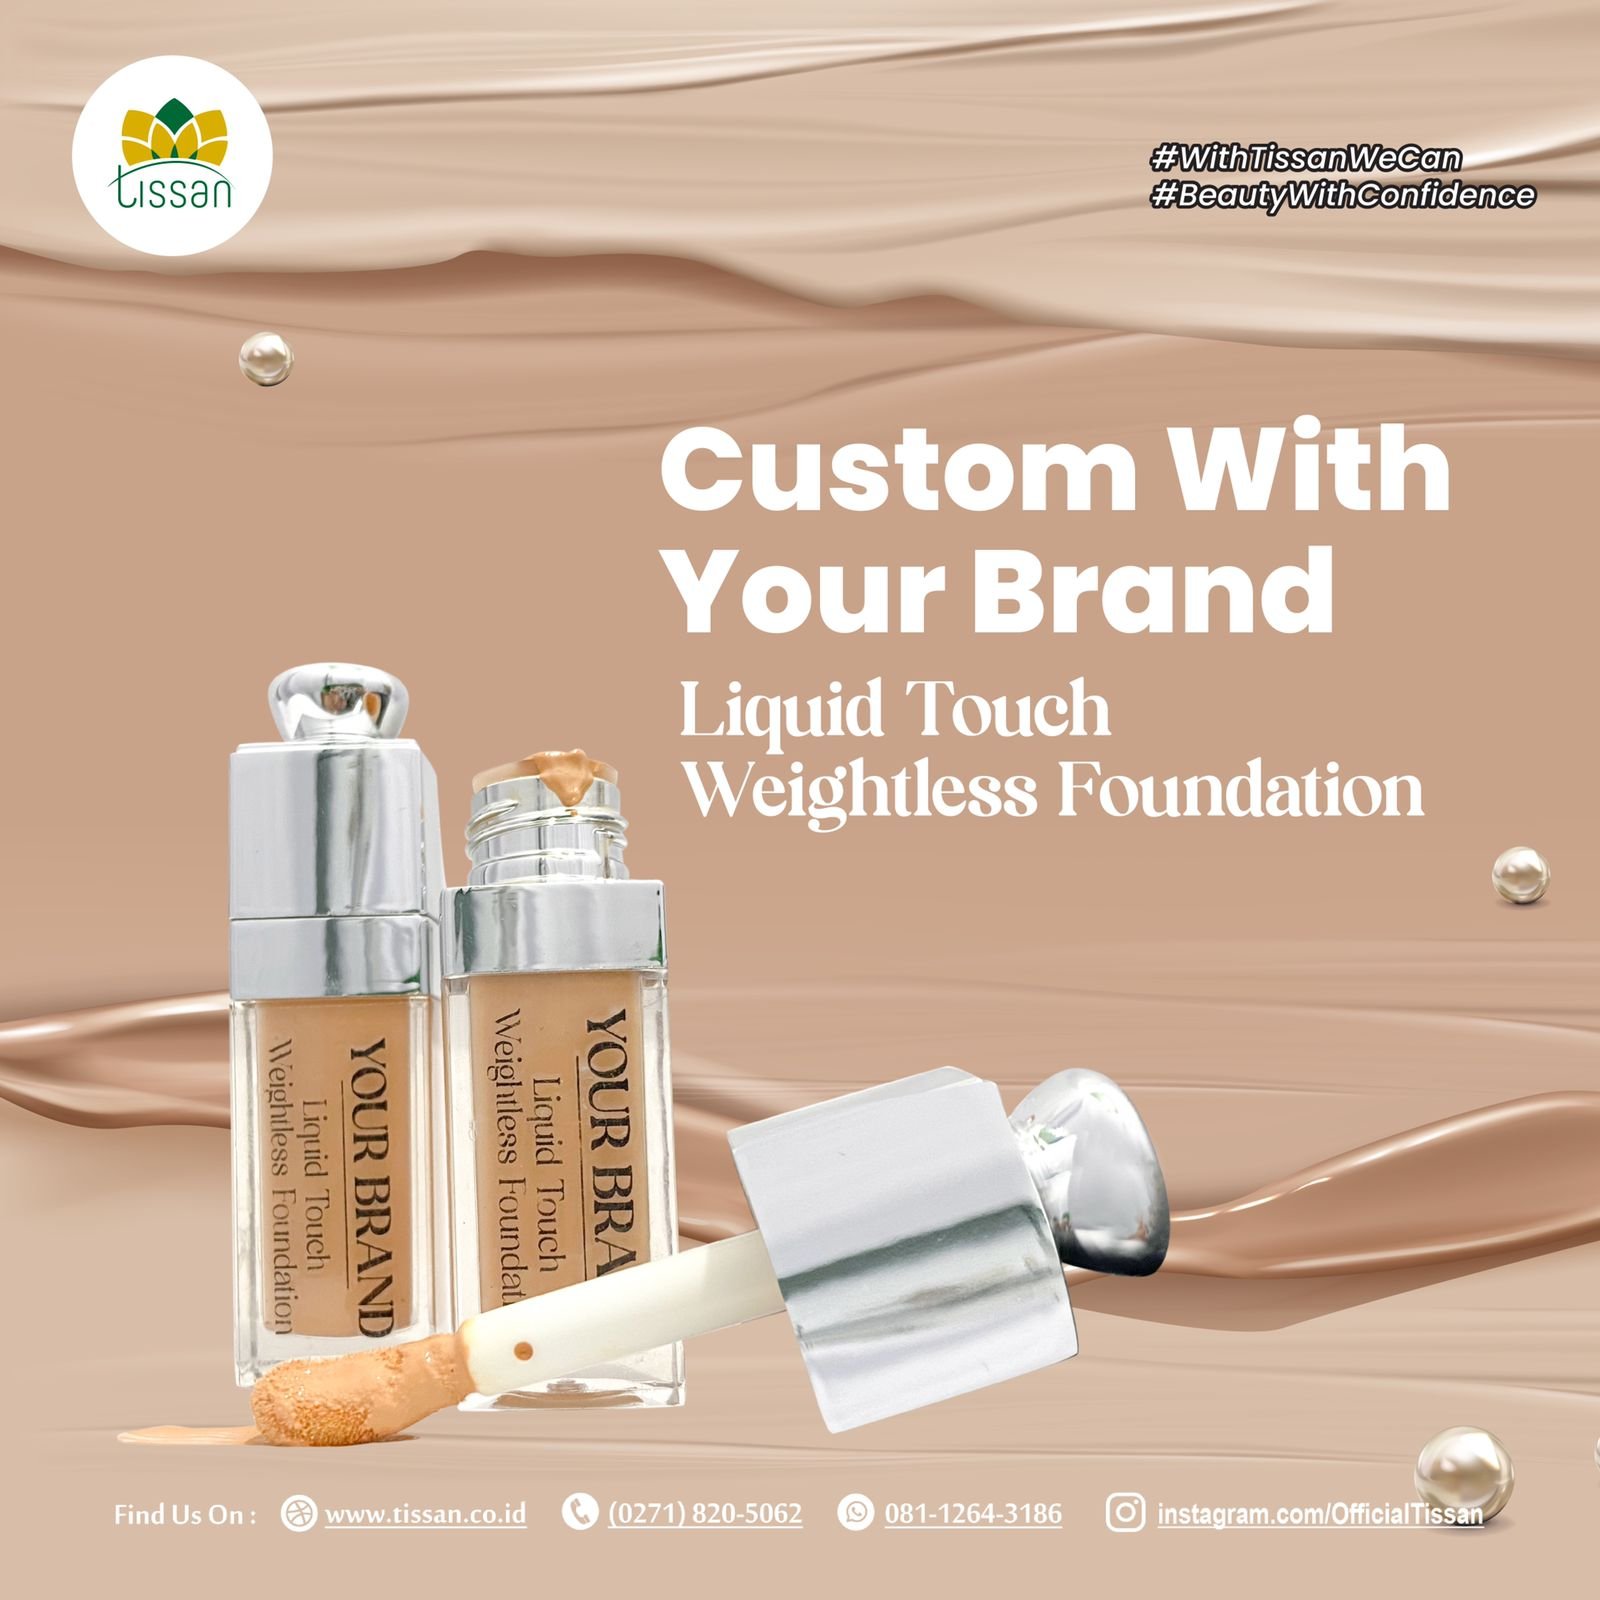 Liquid Touch Weighless Foundation